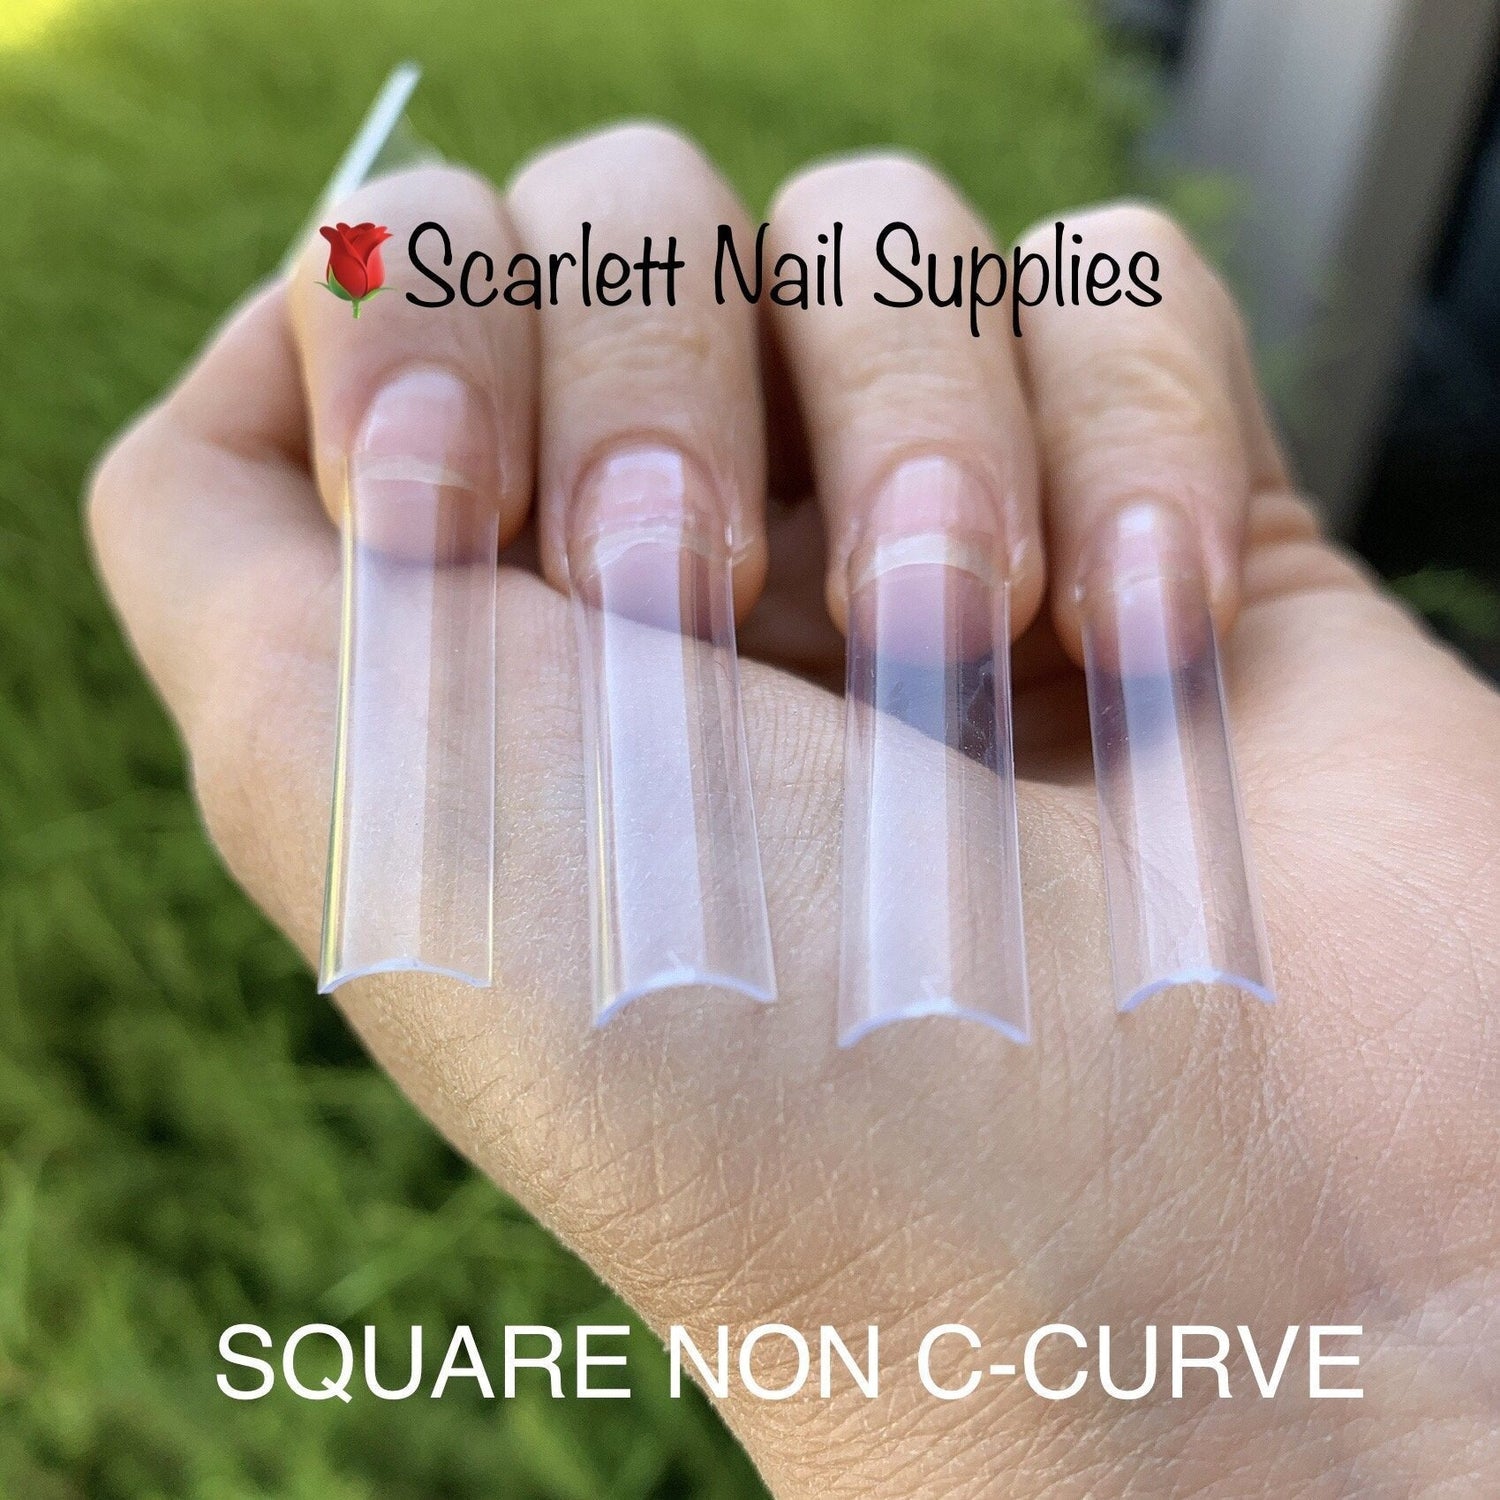 Scarlett Nail Supplies have all types of trending nail tips such as C Curve, No C Curve, Coffin, stiletto and straight nail tips.....for the nail artists to design coffin nails, long tapered square nails, stiletto nails, square long acrylic nails.